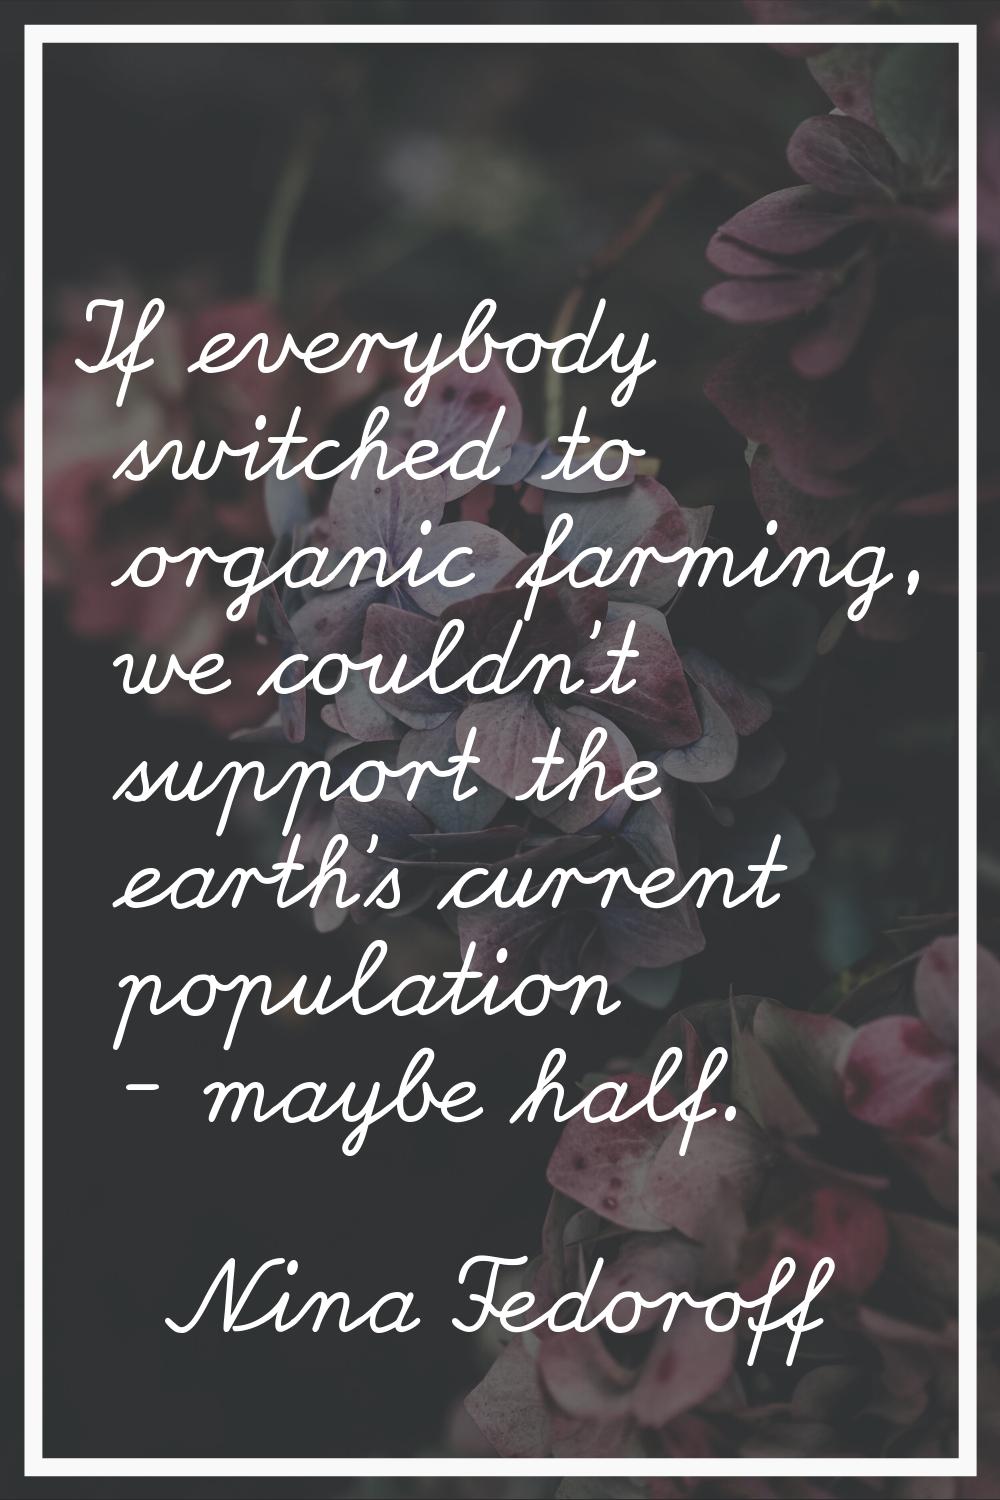 If everybody switched to organic farming, we couldn't support the earth's current population - mayb